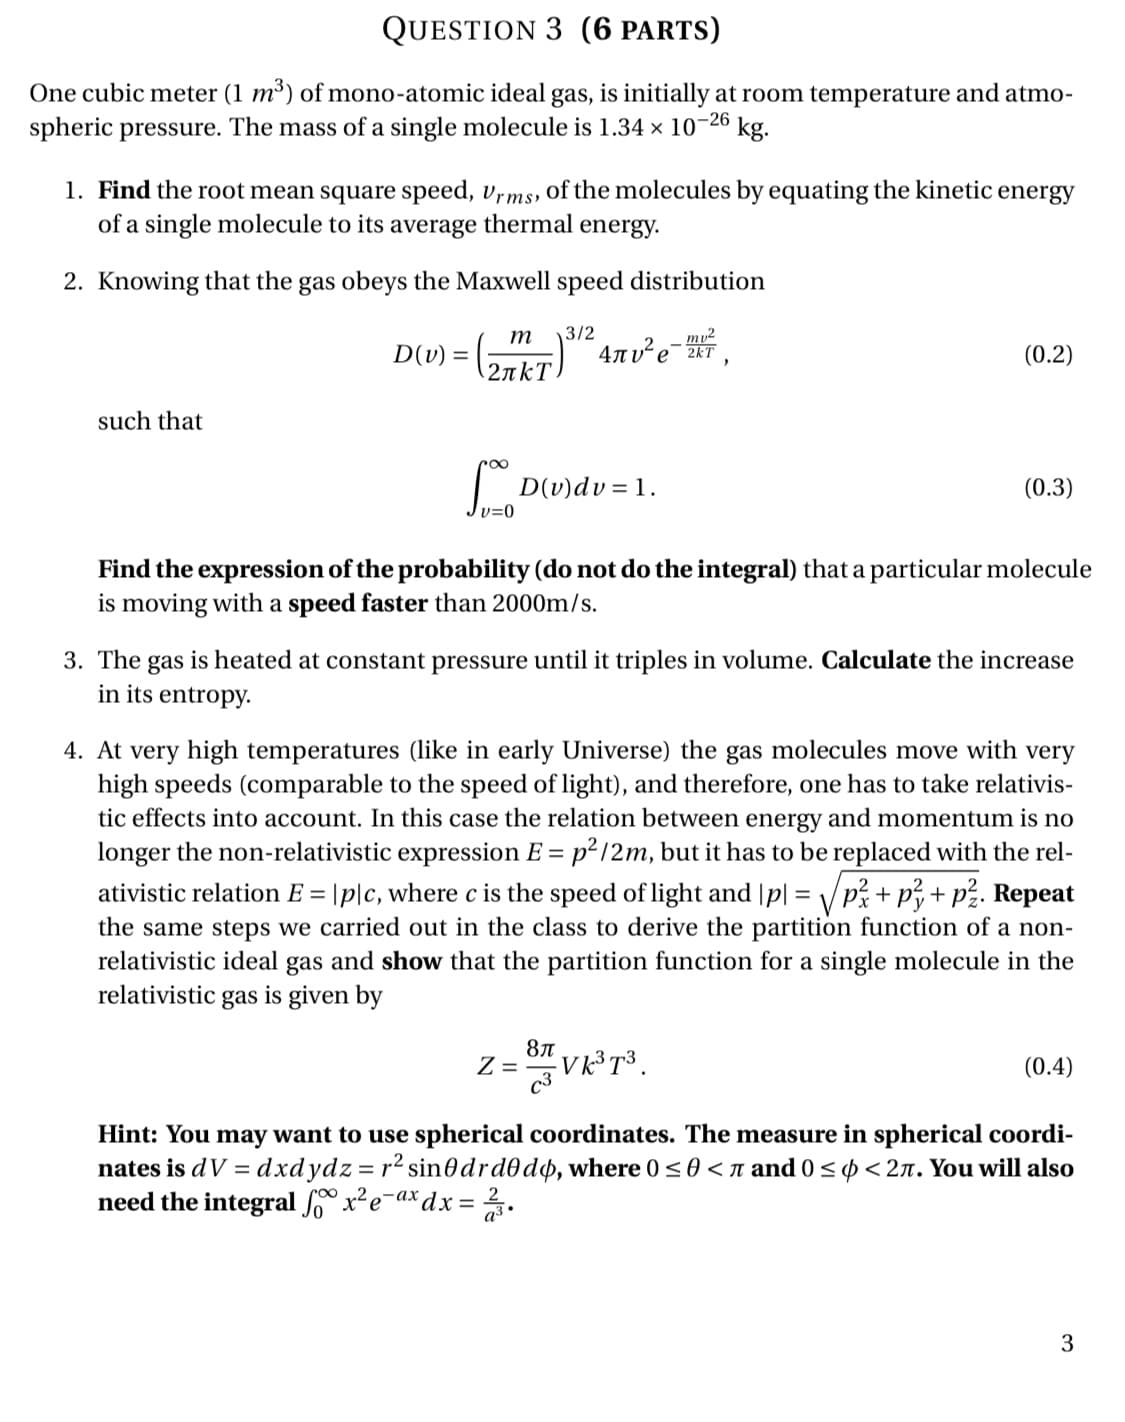 4. At very high temperatures (like in early Universe) the gas molecules move with very
high speeds (comparable to the speed of light), and therefore, one has to take relativis-
tic effects into account. In this case the relation between energy and momentum is no
longer the non-relativistic expression E = p²/2m, but it has to be replaced with the rel-
ativistic relation E = |p|c, where c is the speed of light and |p| = /p; + p3+ p?. Repeat
the same steps we carried out in the class to derive the partition function of a non-
relativistic ideal gas and show that the partition function for a single molecule in the
relativistic gas is given by
V K³T³ .
c3
8л
(0.4)
